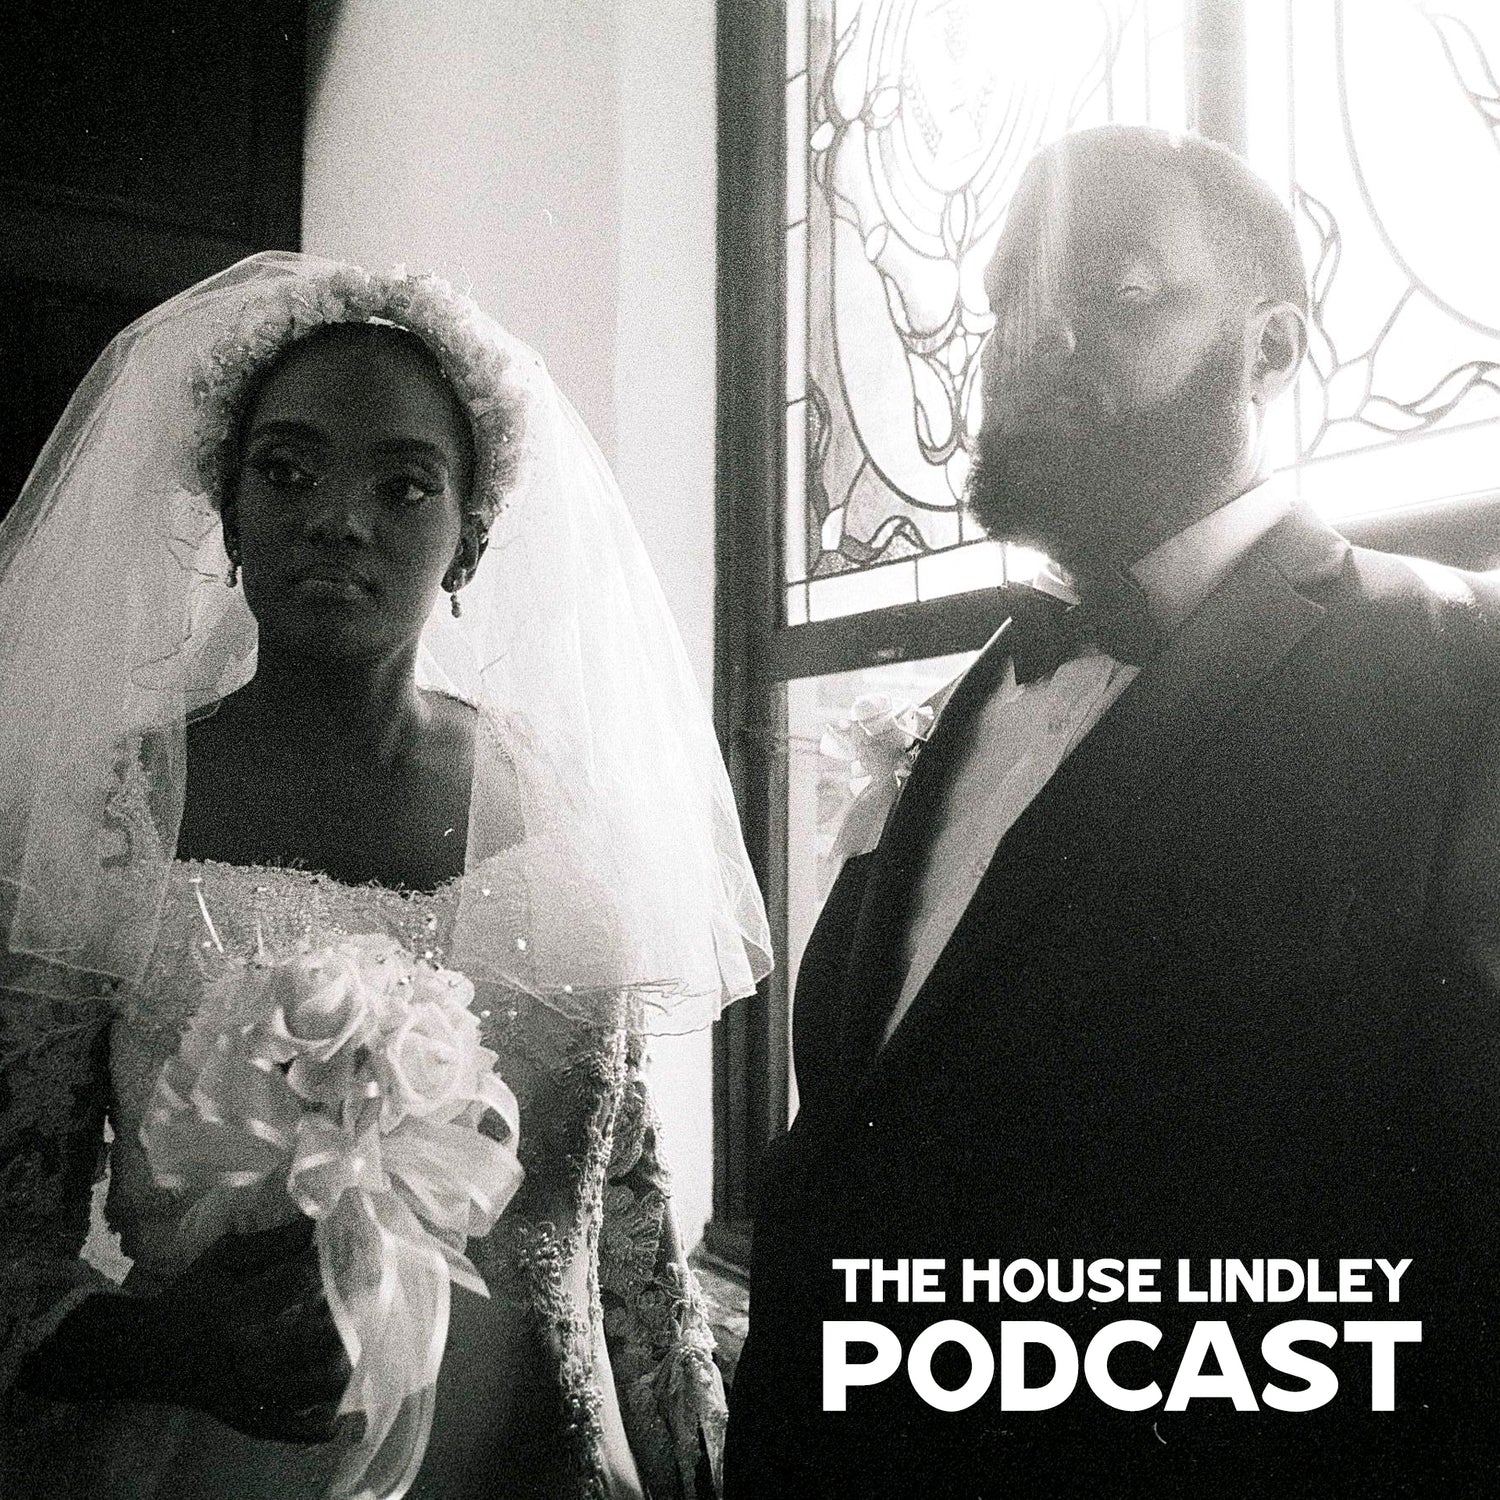 The House Lindley Podcast Relaunches